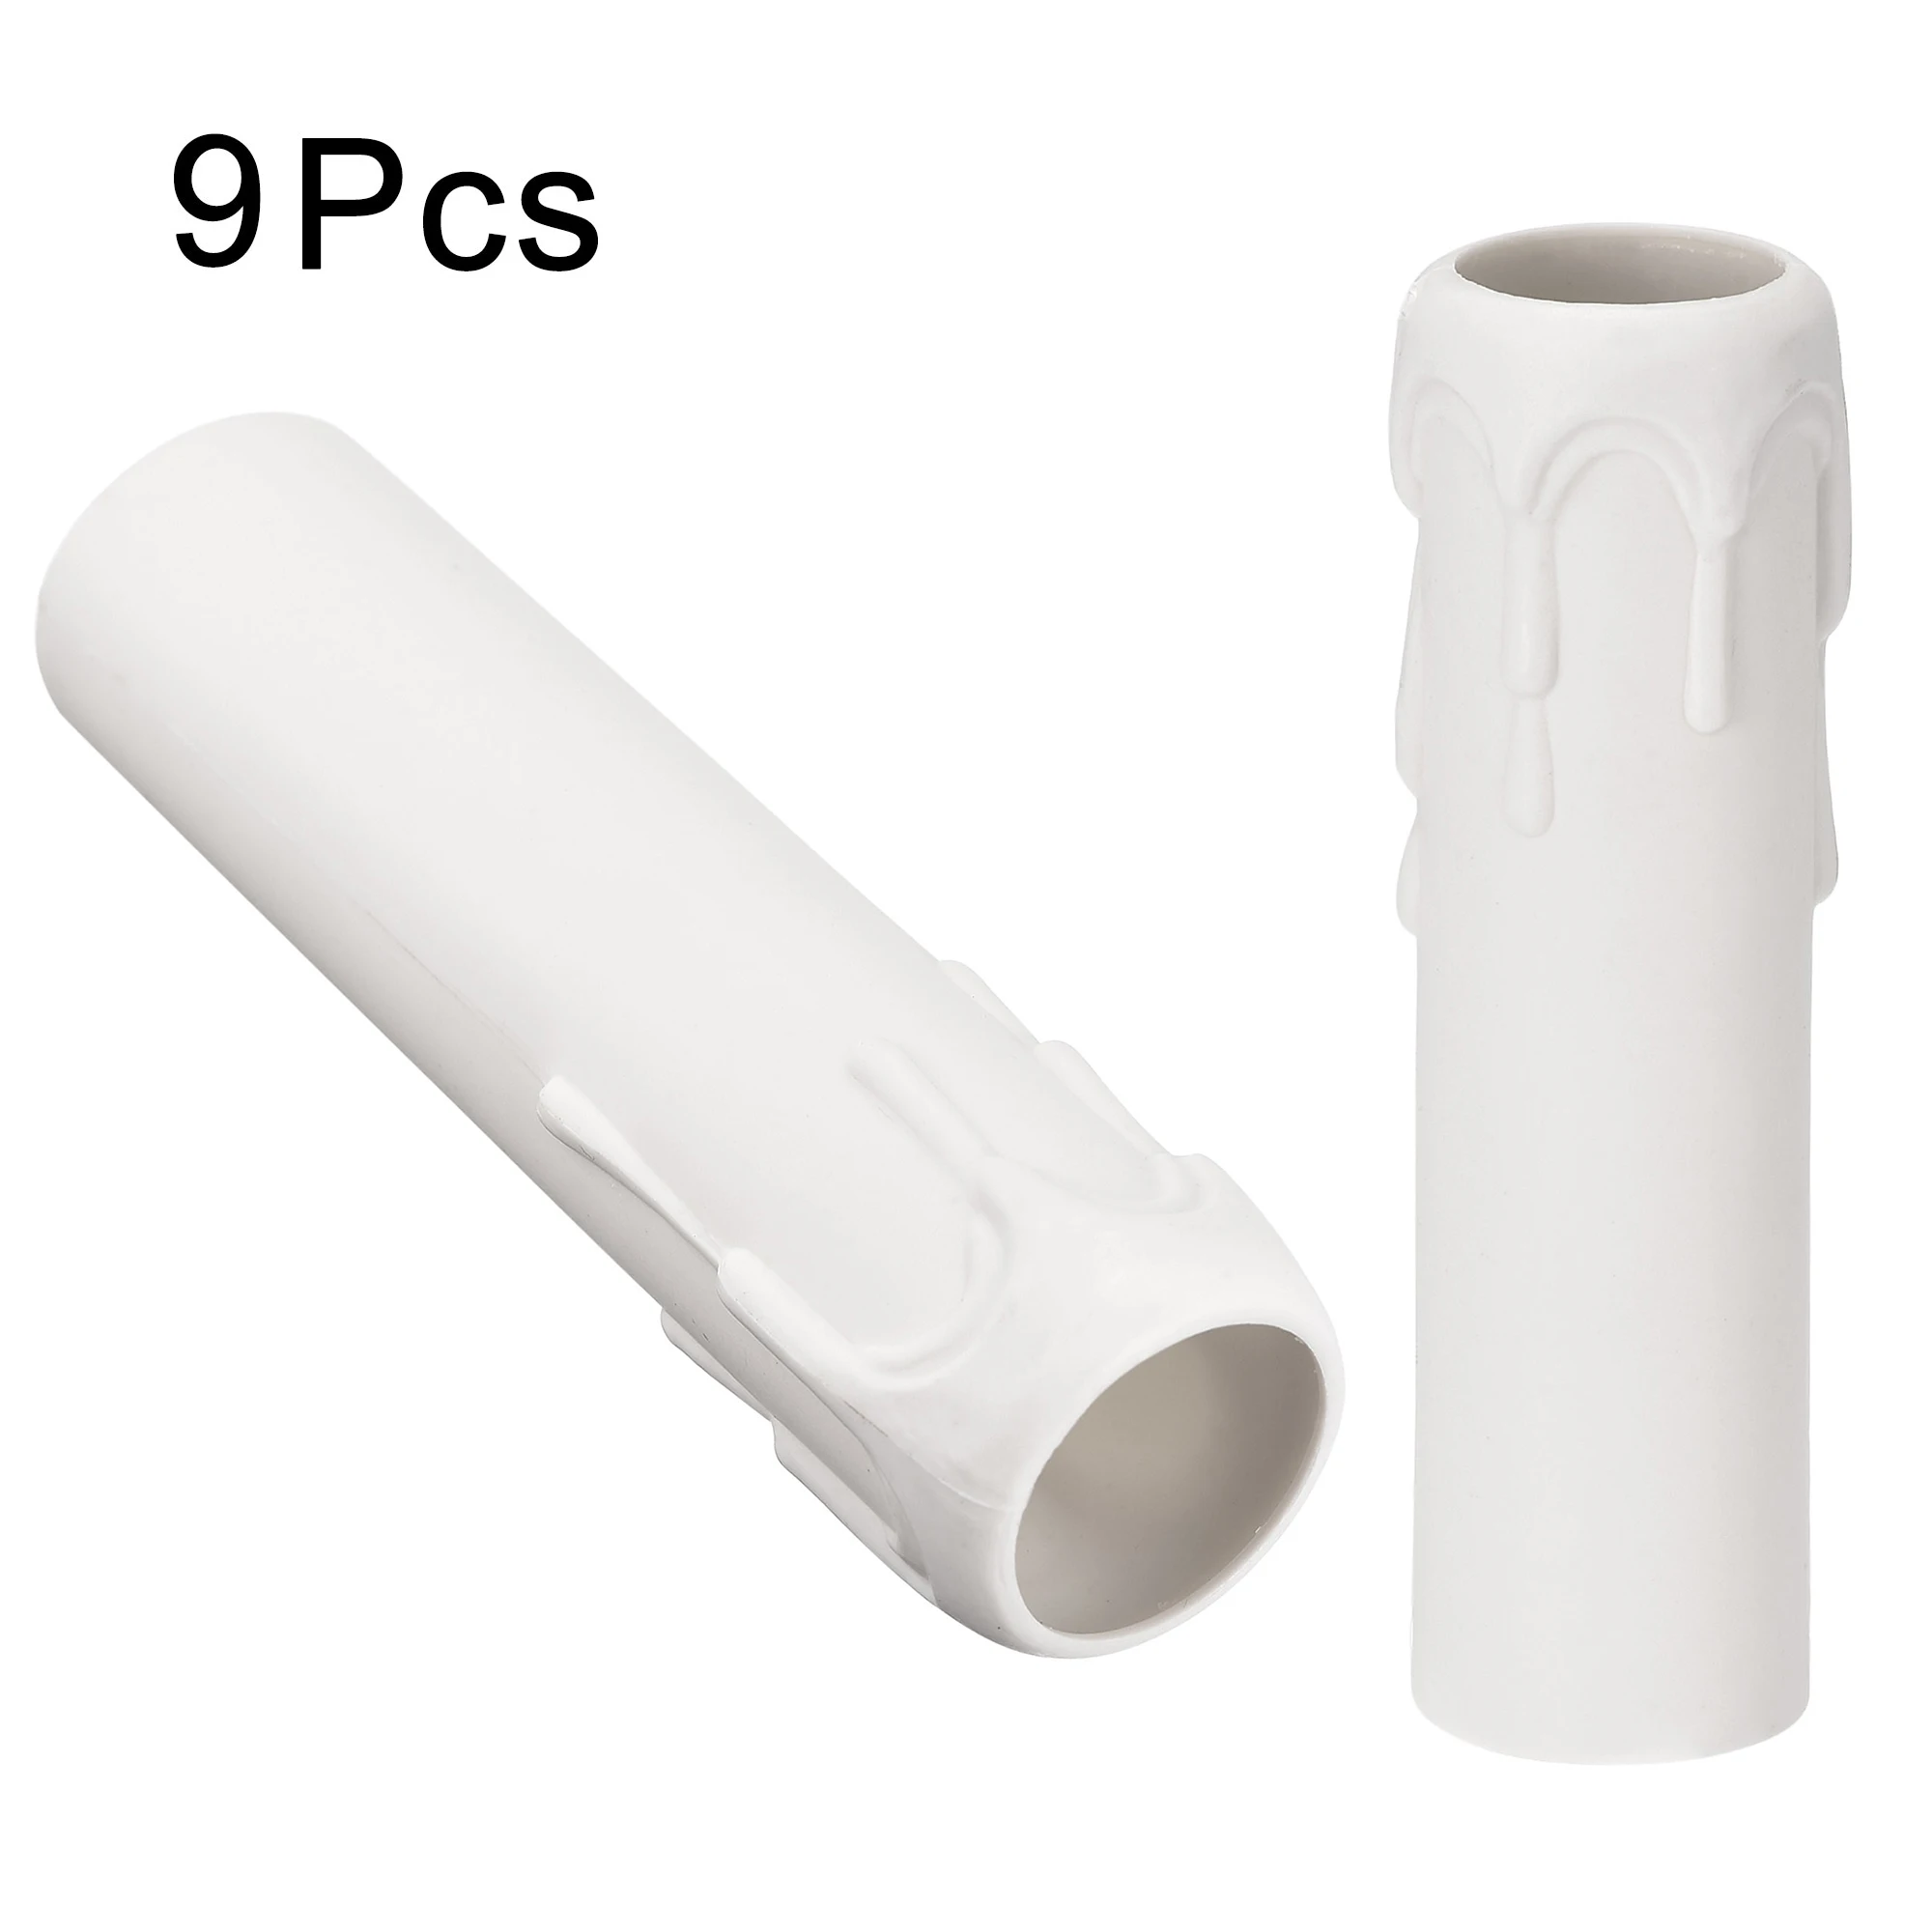 9Pcs 25x100mm White Plastic Candle Bulb Base Covers Sleeves Candle Lamp Holder Tube Candle Lamp Base Sleeve for E14 Chandelier